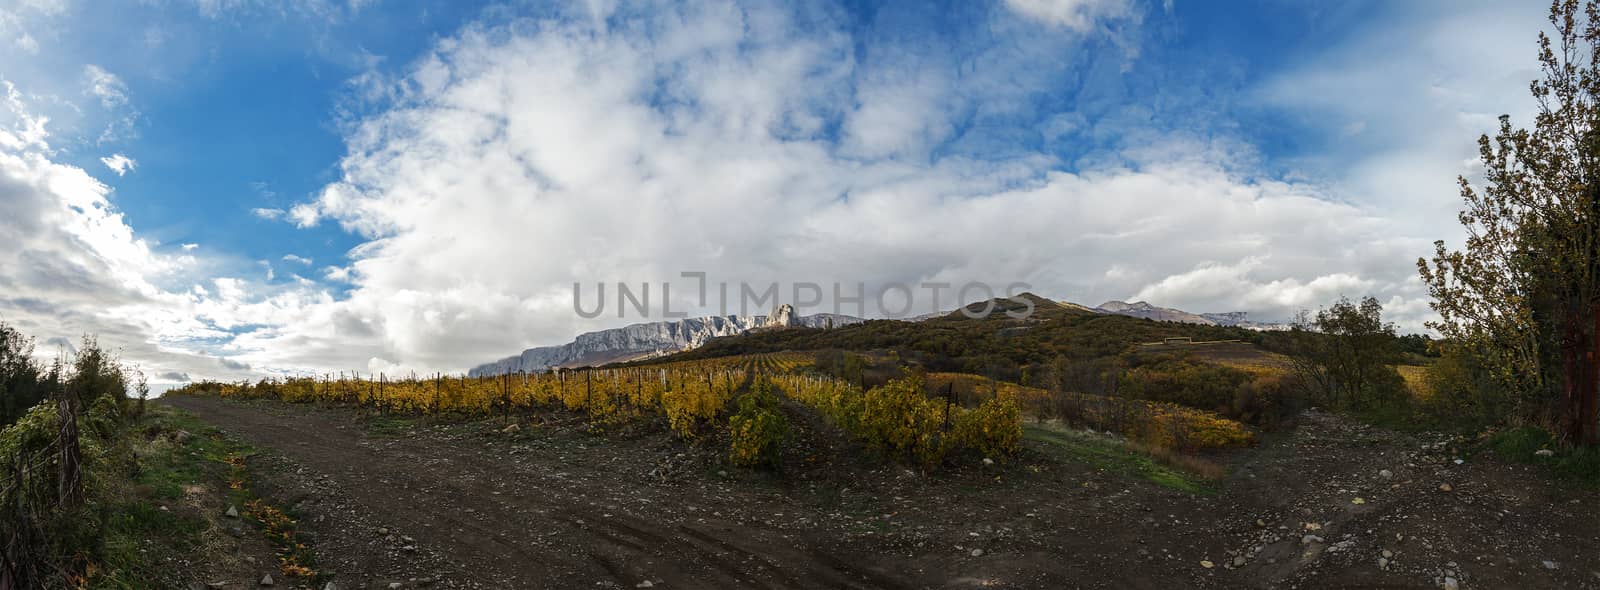 Vineyard on a background of mountains and sky by fogen